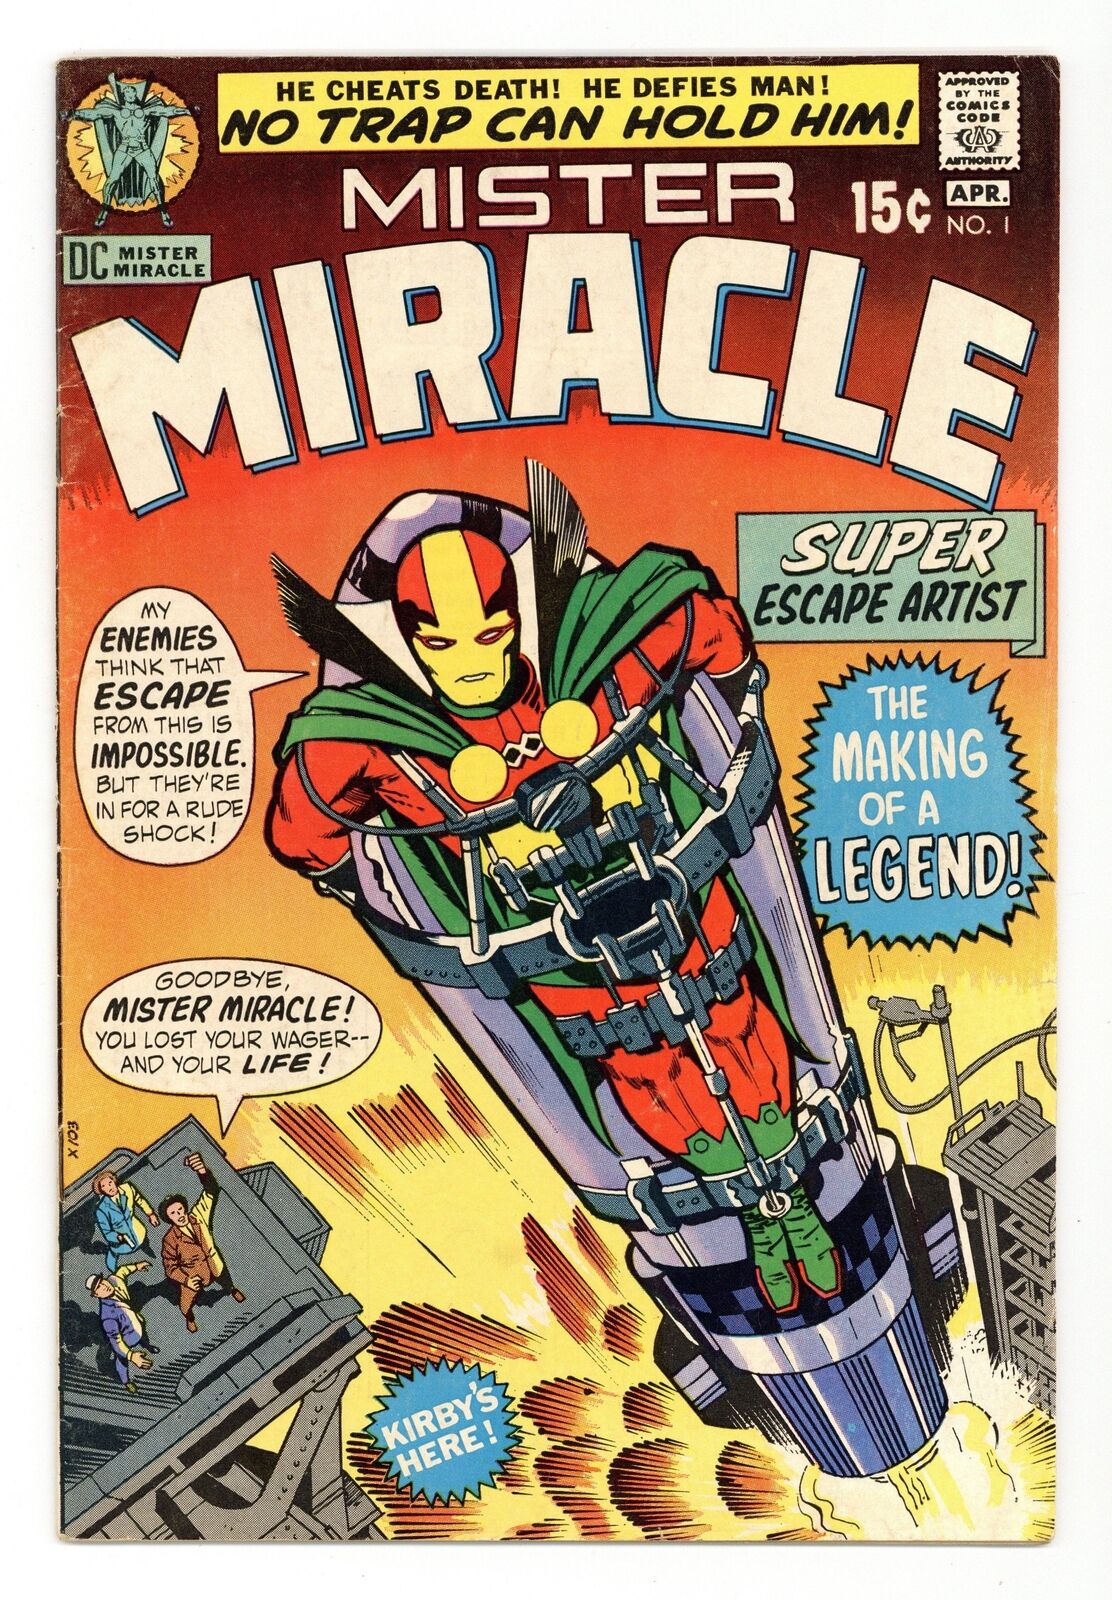 Mister Miracle #1 VG+ 4.5 1971 1st app. Mr. Miracle